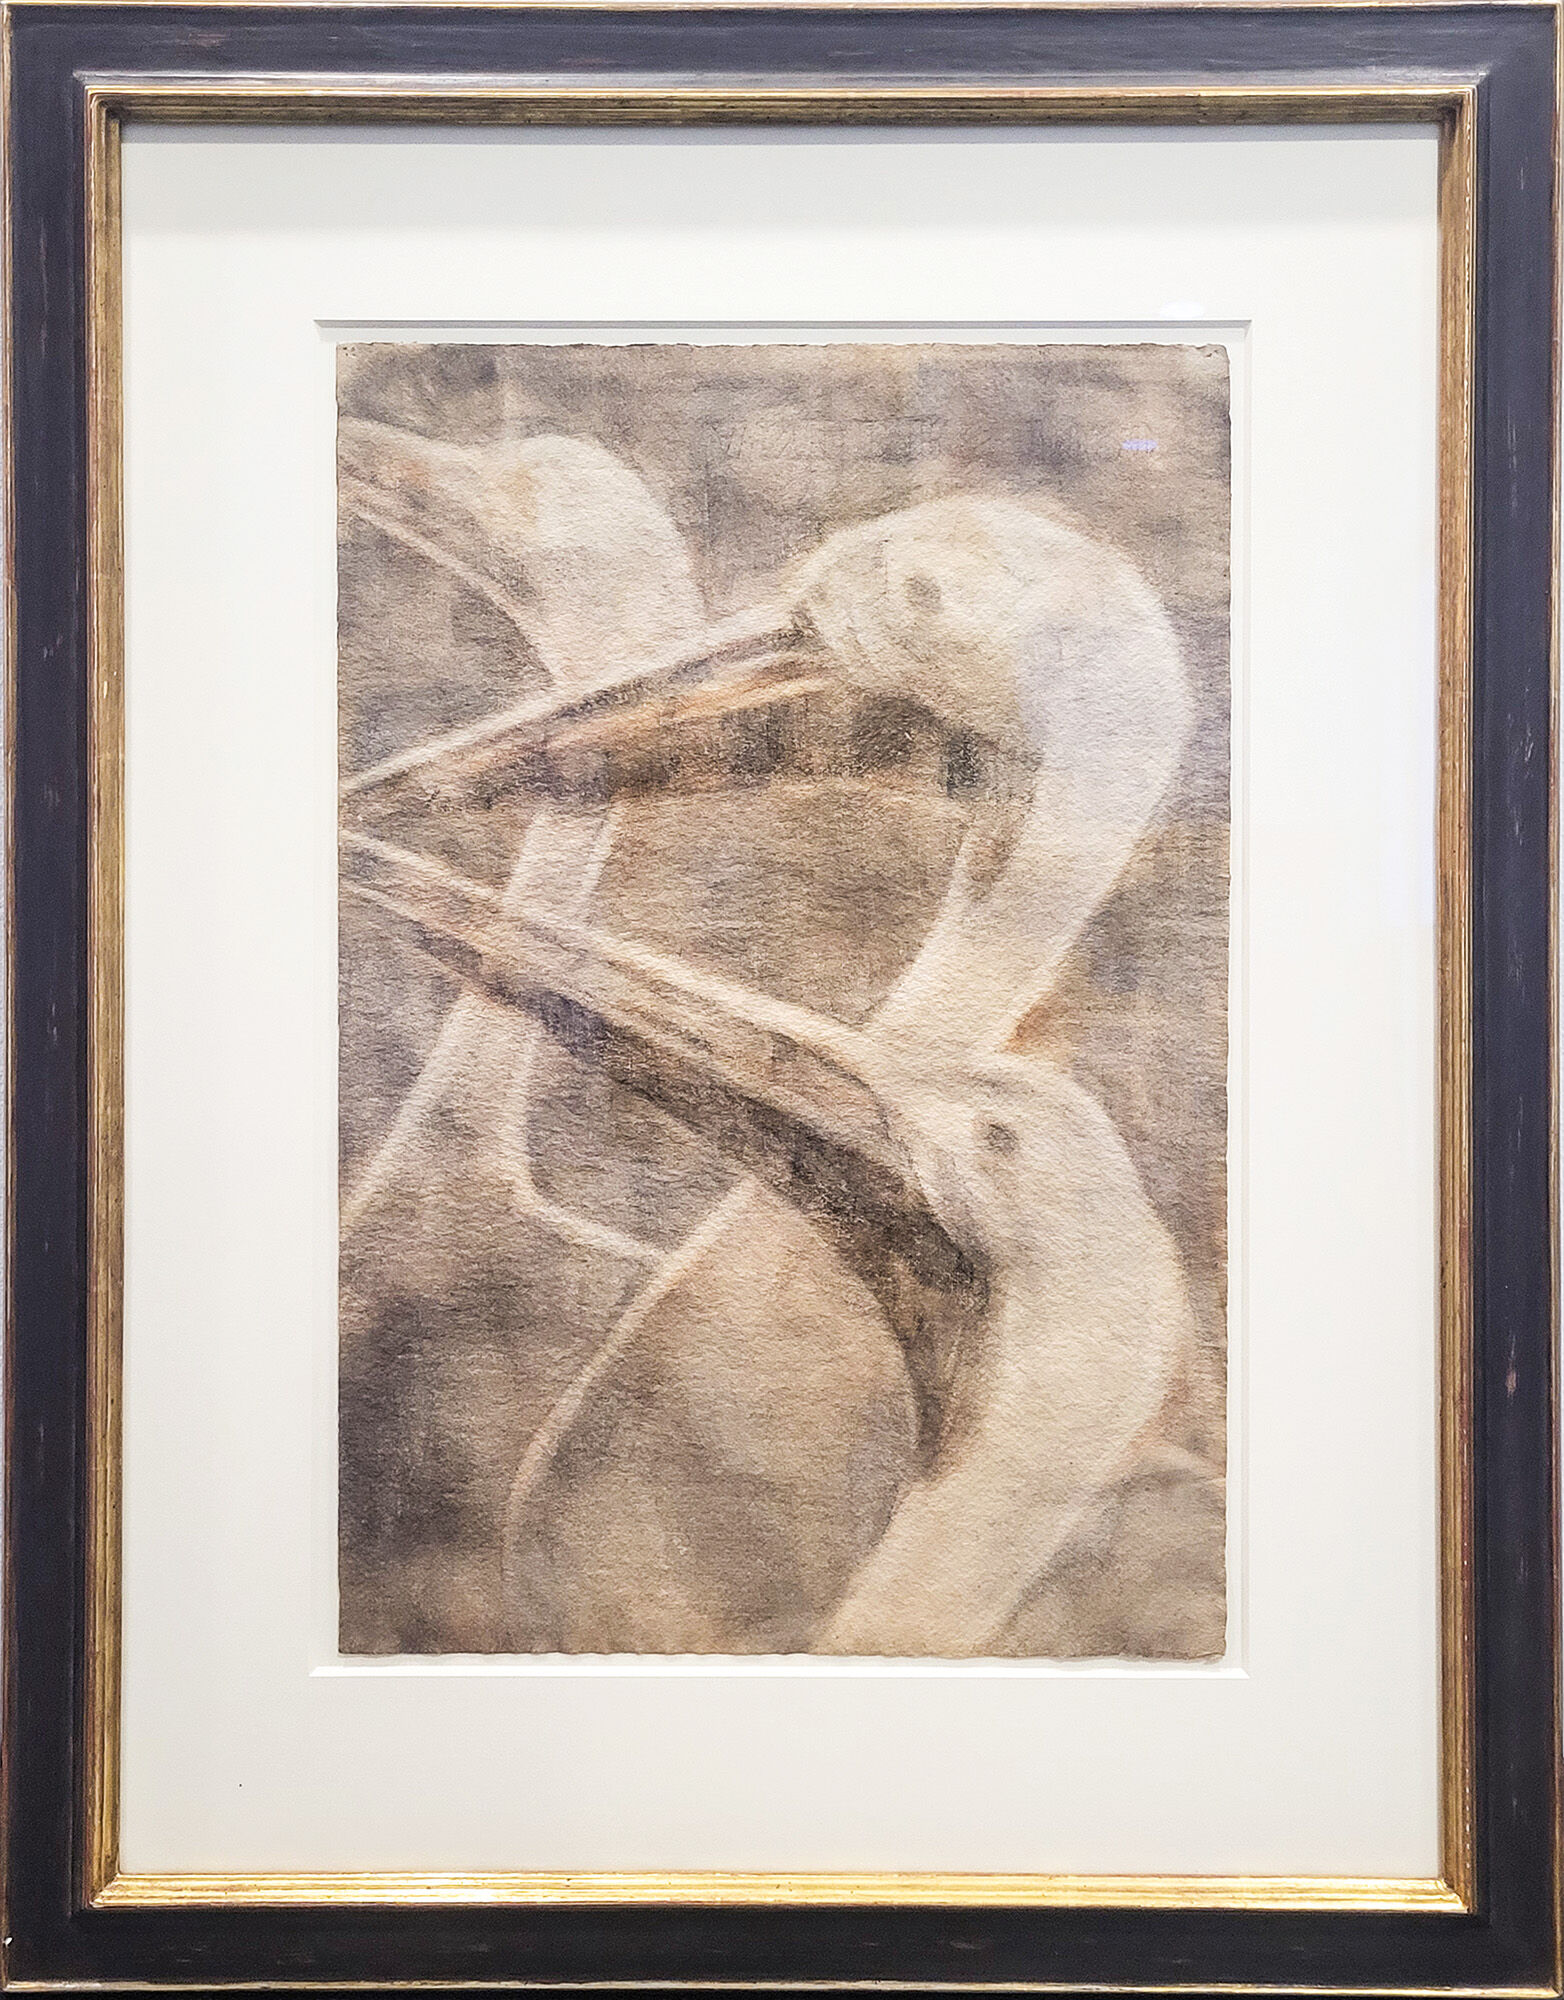 Picture "Heron" (1936) (Unique piece) by Christian Rohlfs